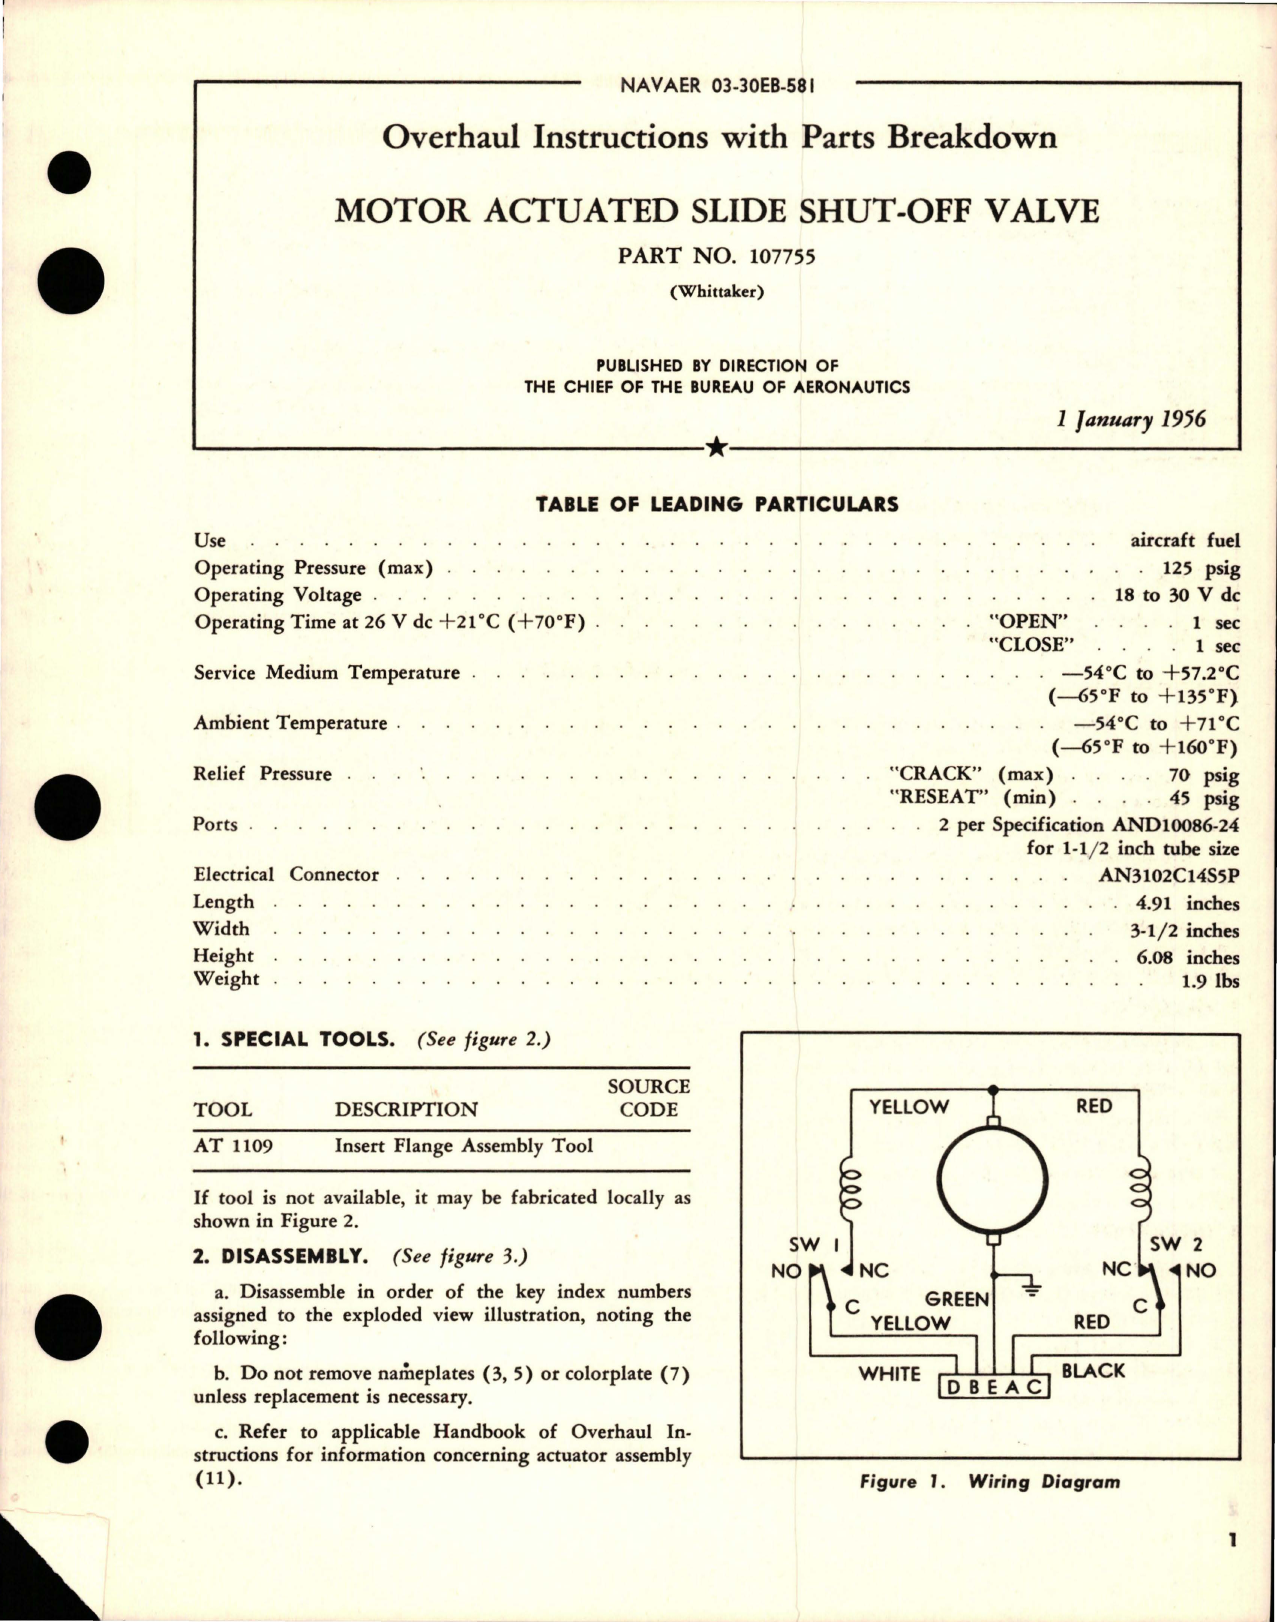 Sample page 1 from AirCorps Library document: Overhaul Instructions with Parts Breakdown for Motor Actuated Slide Shut-Off Valve - Part 107755 